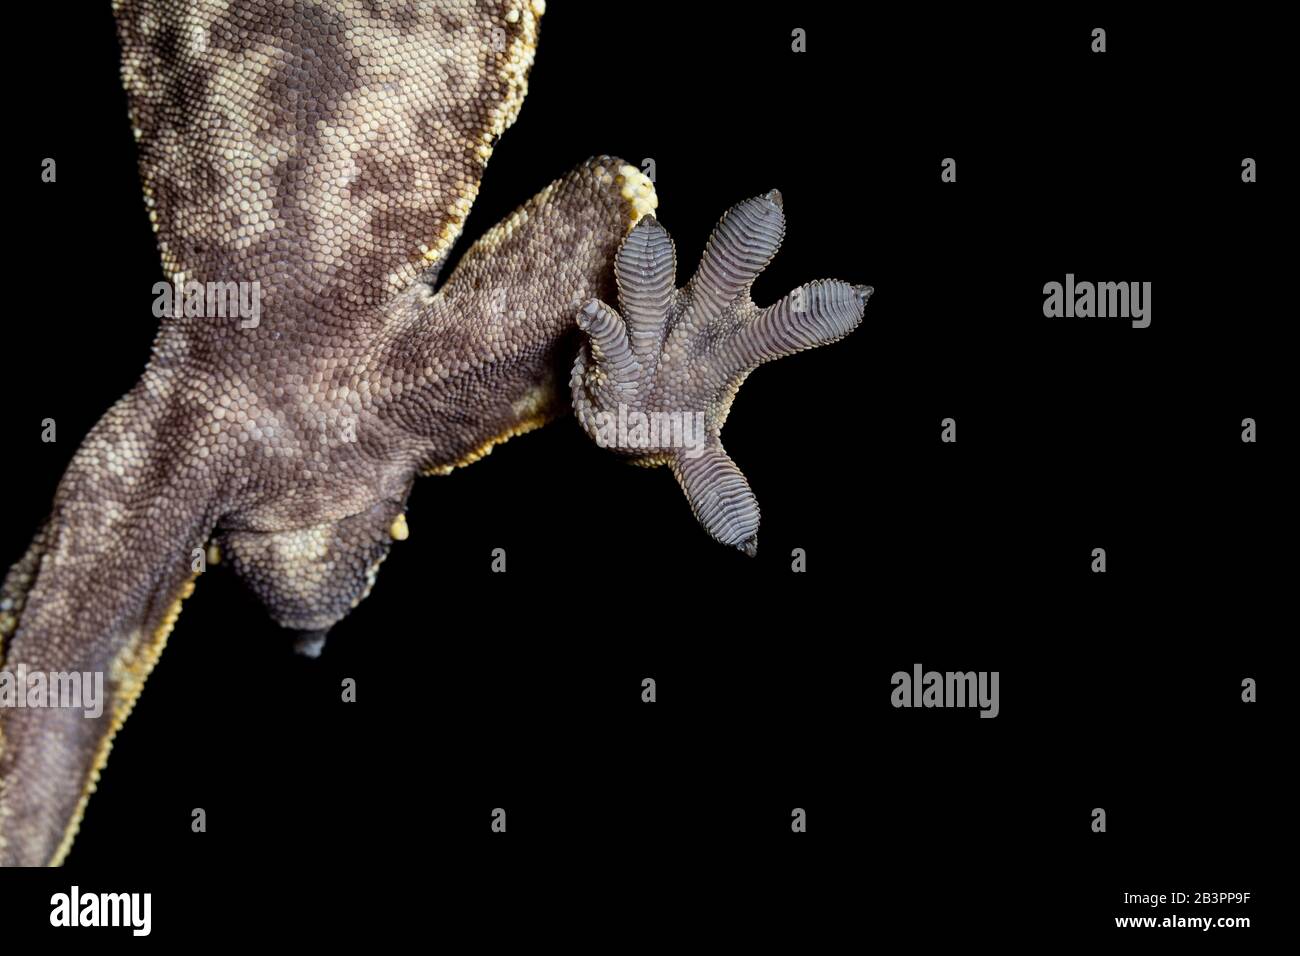 Crested Gecko Foot sticking to a piece of glass Stock Photo